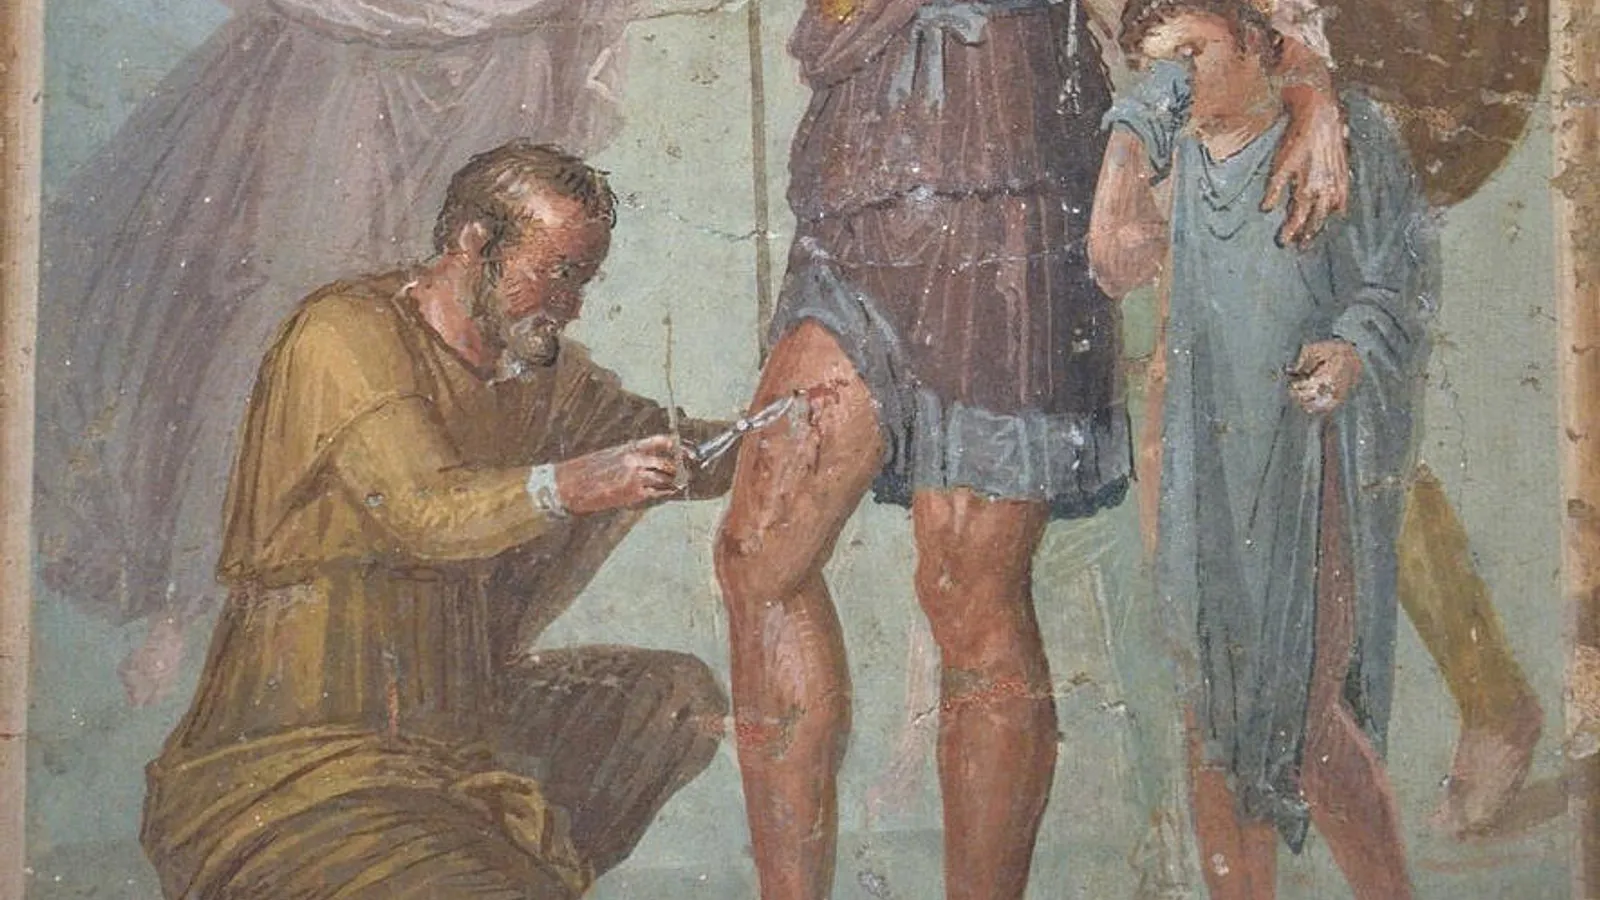 Ophthalmology in Ancient Rome